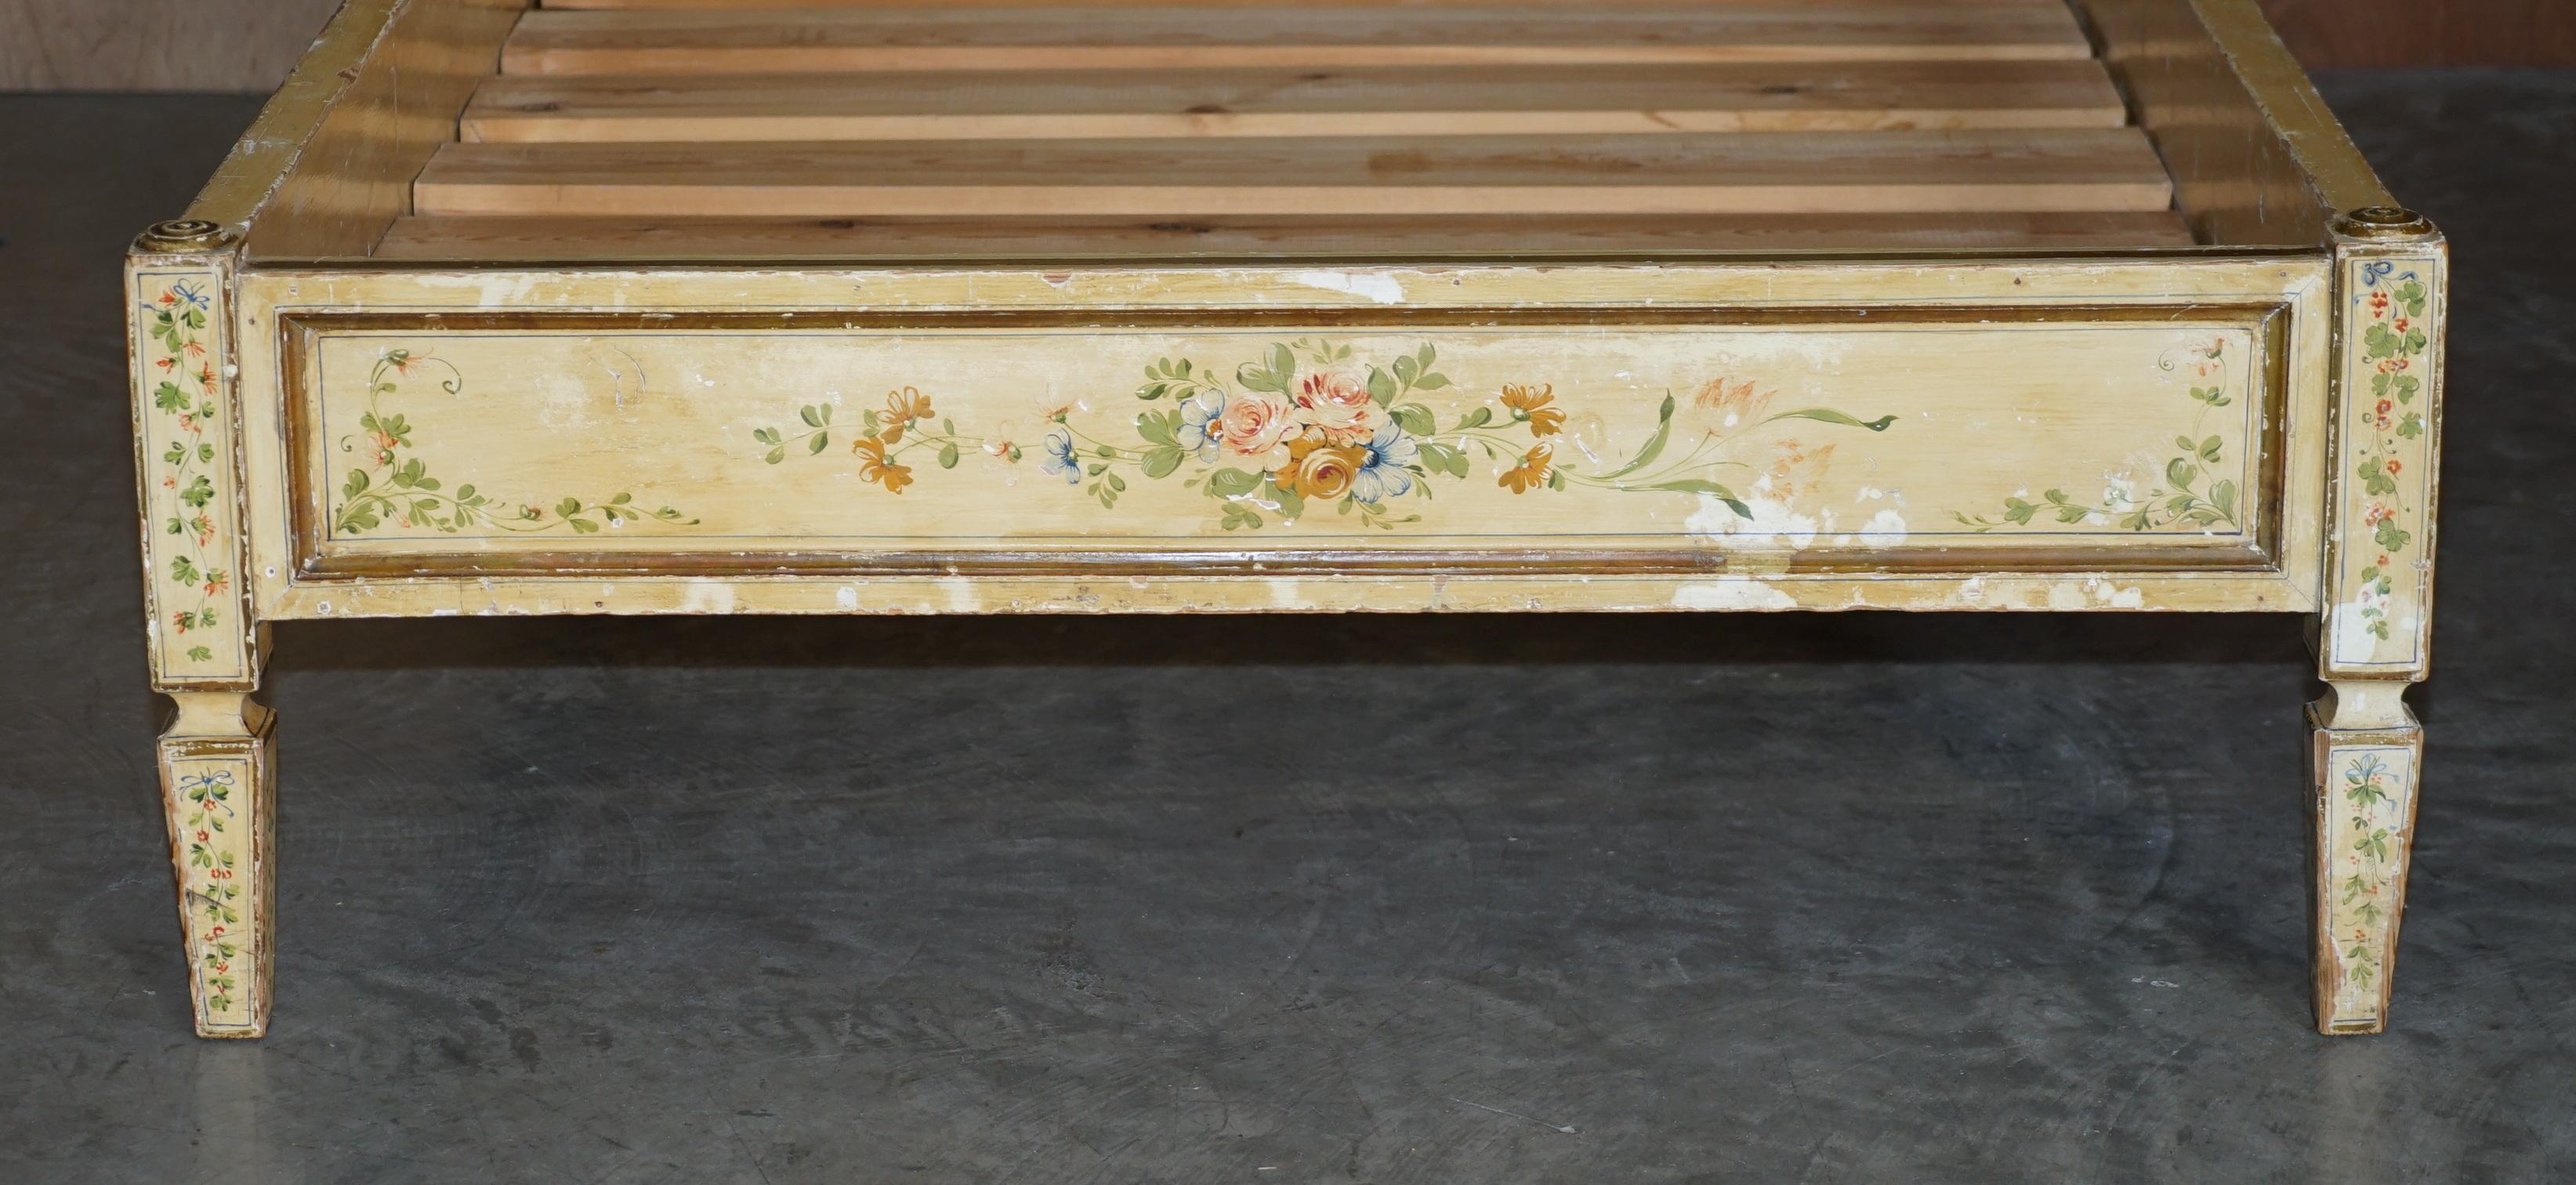 Hand-Crafted Antique French Hand Painted Ornately Decorated Bed Frame in Oak Pine Slats For Sale